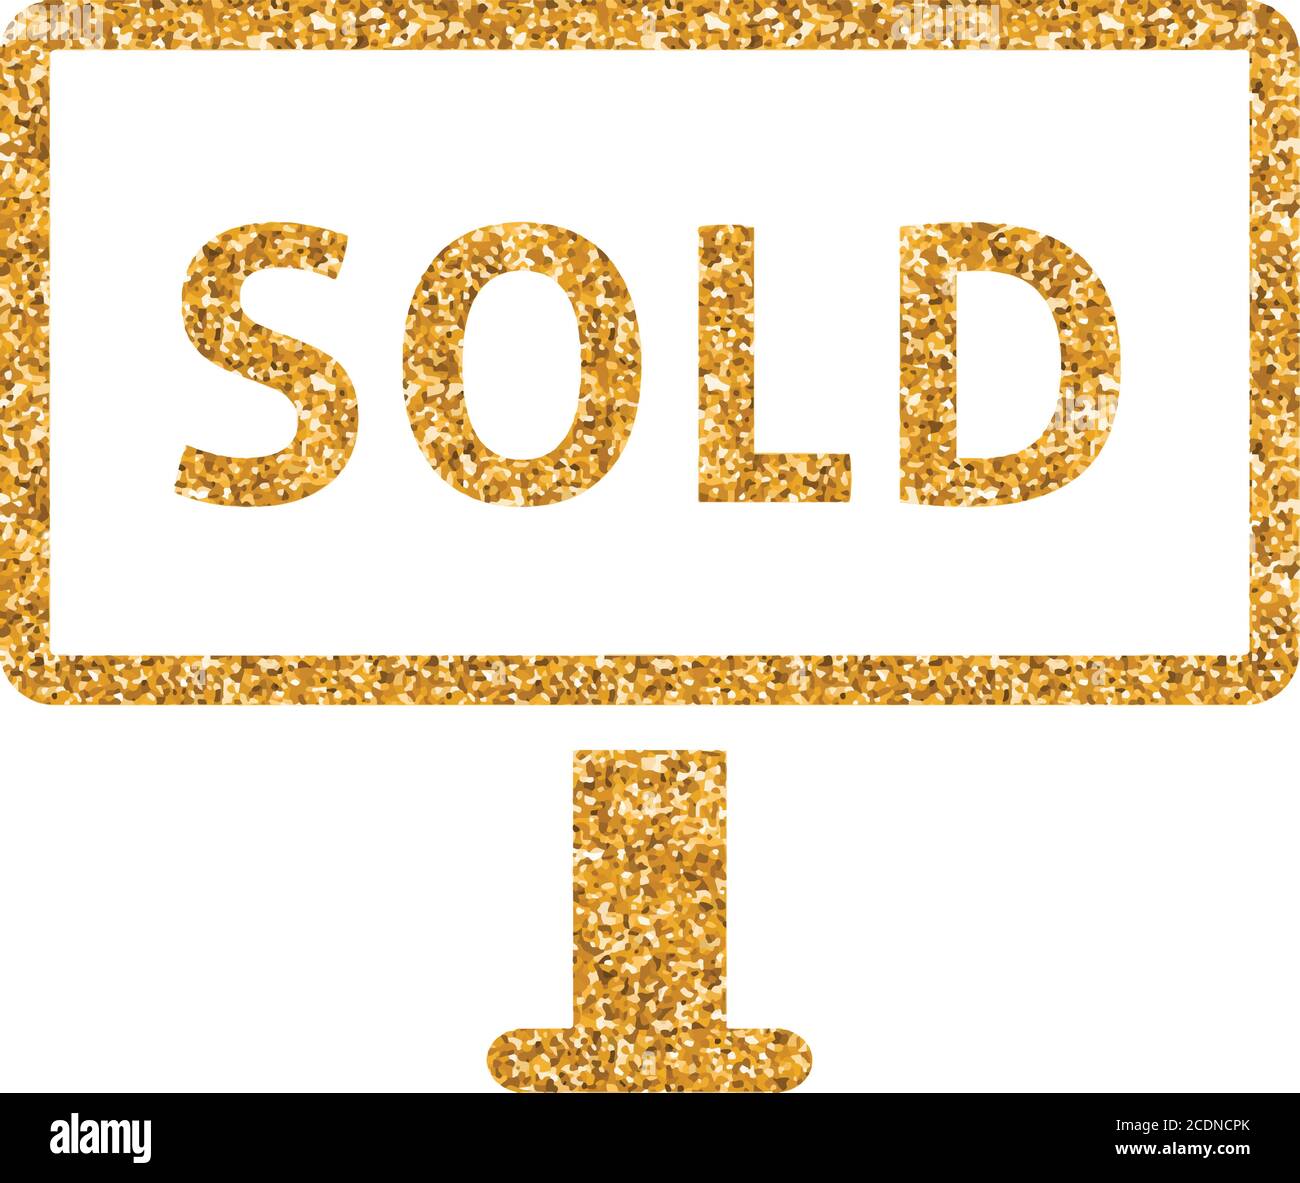 Sold out sign icon in gold glitter texture. Sparkle luxury style ...